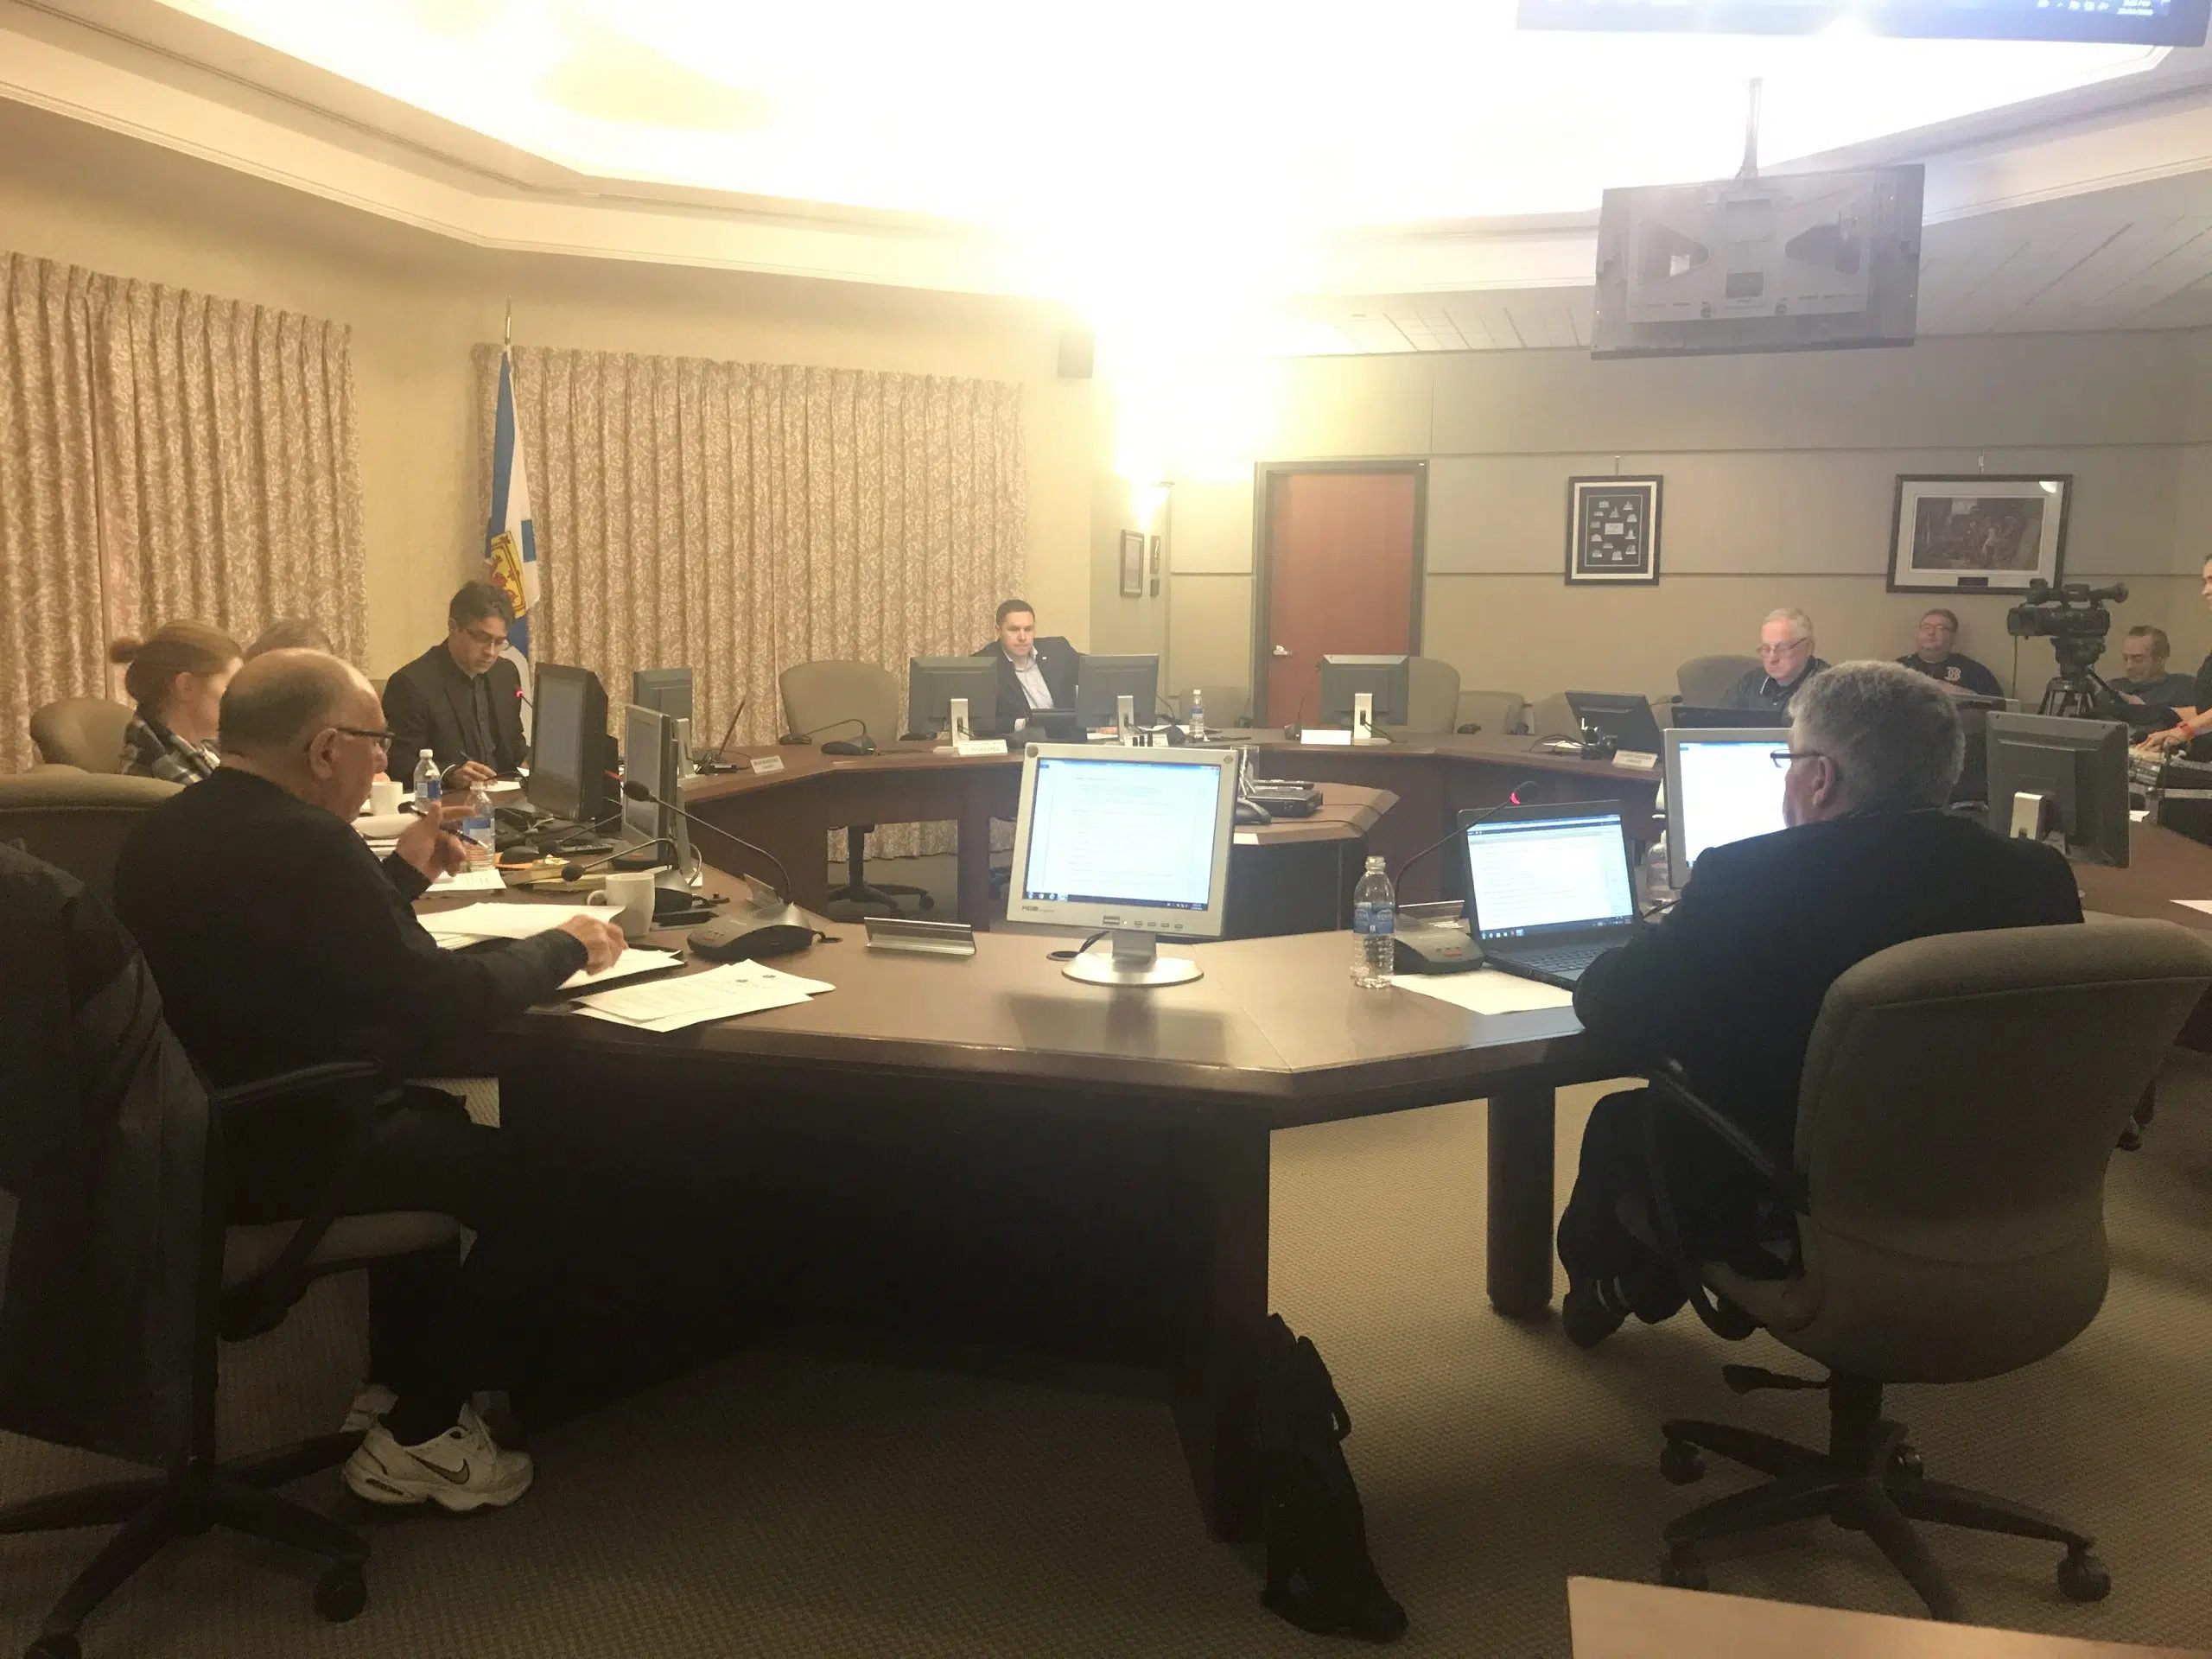 Warden says they hope to hold last budget deliberation meeting Tuesday